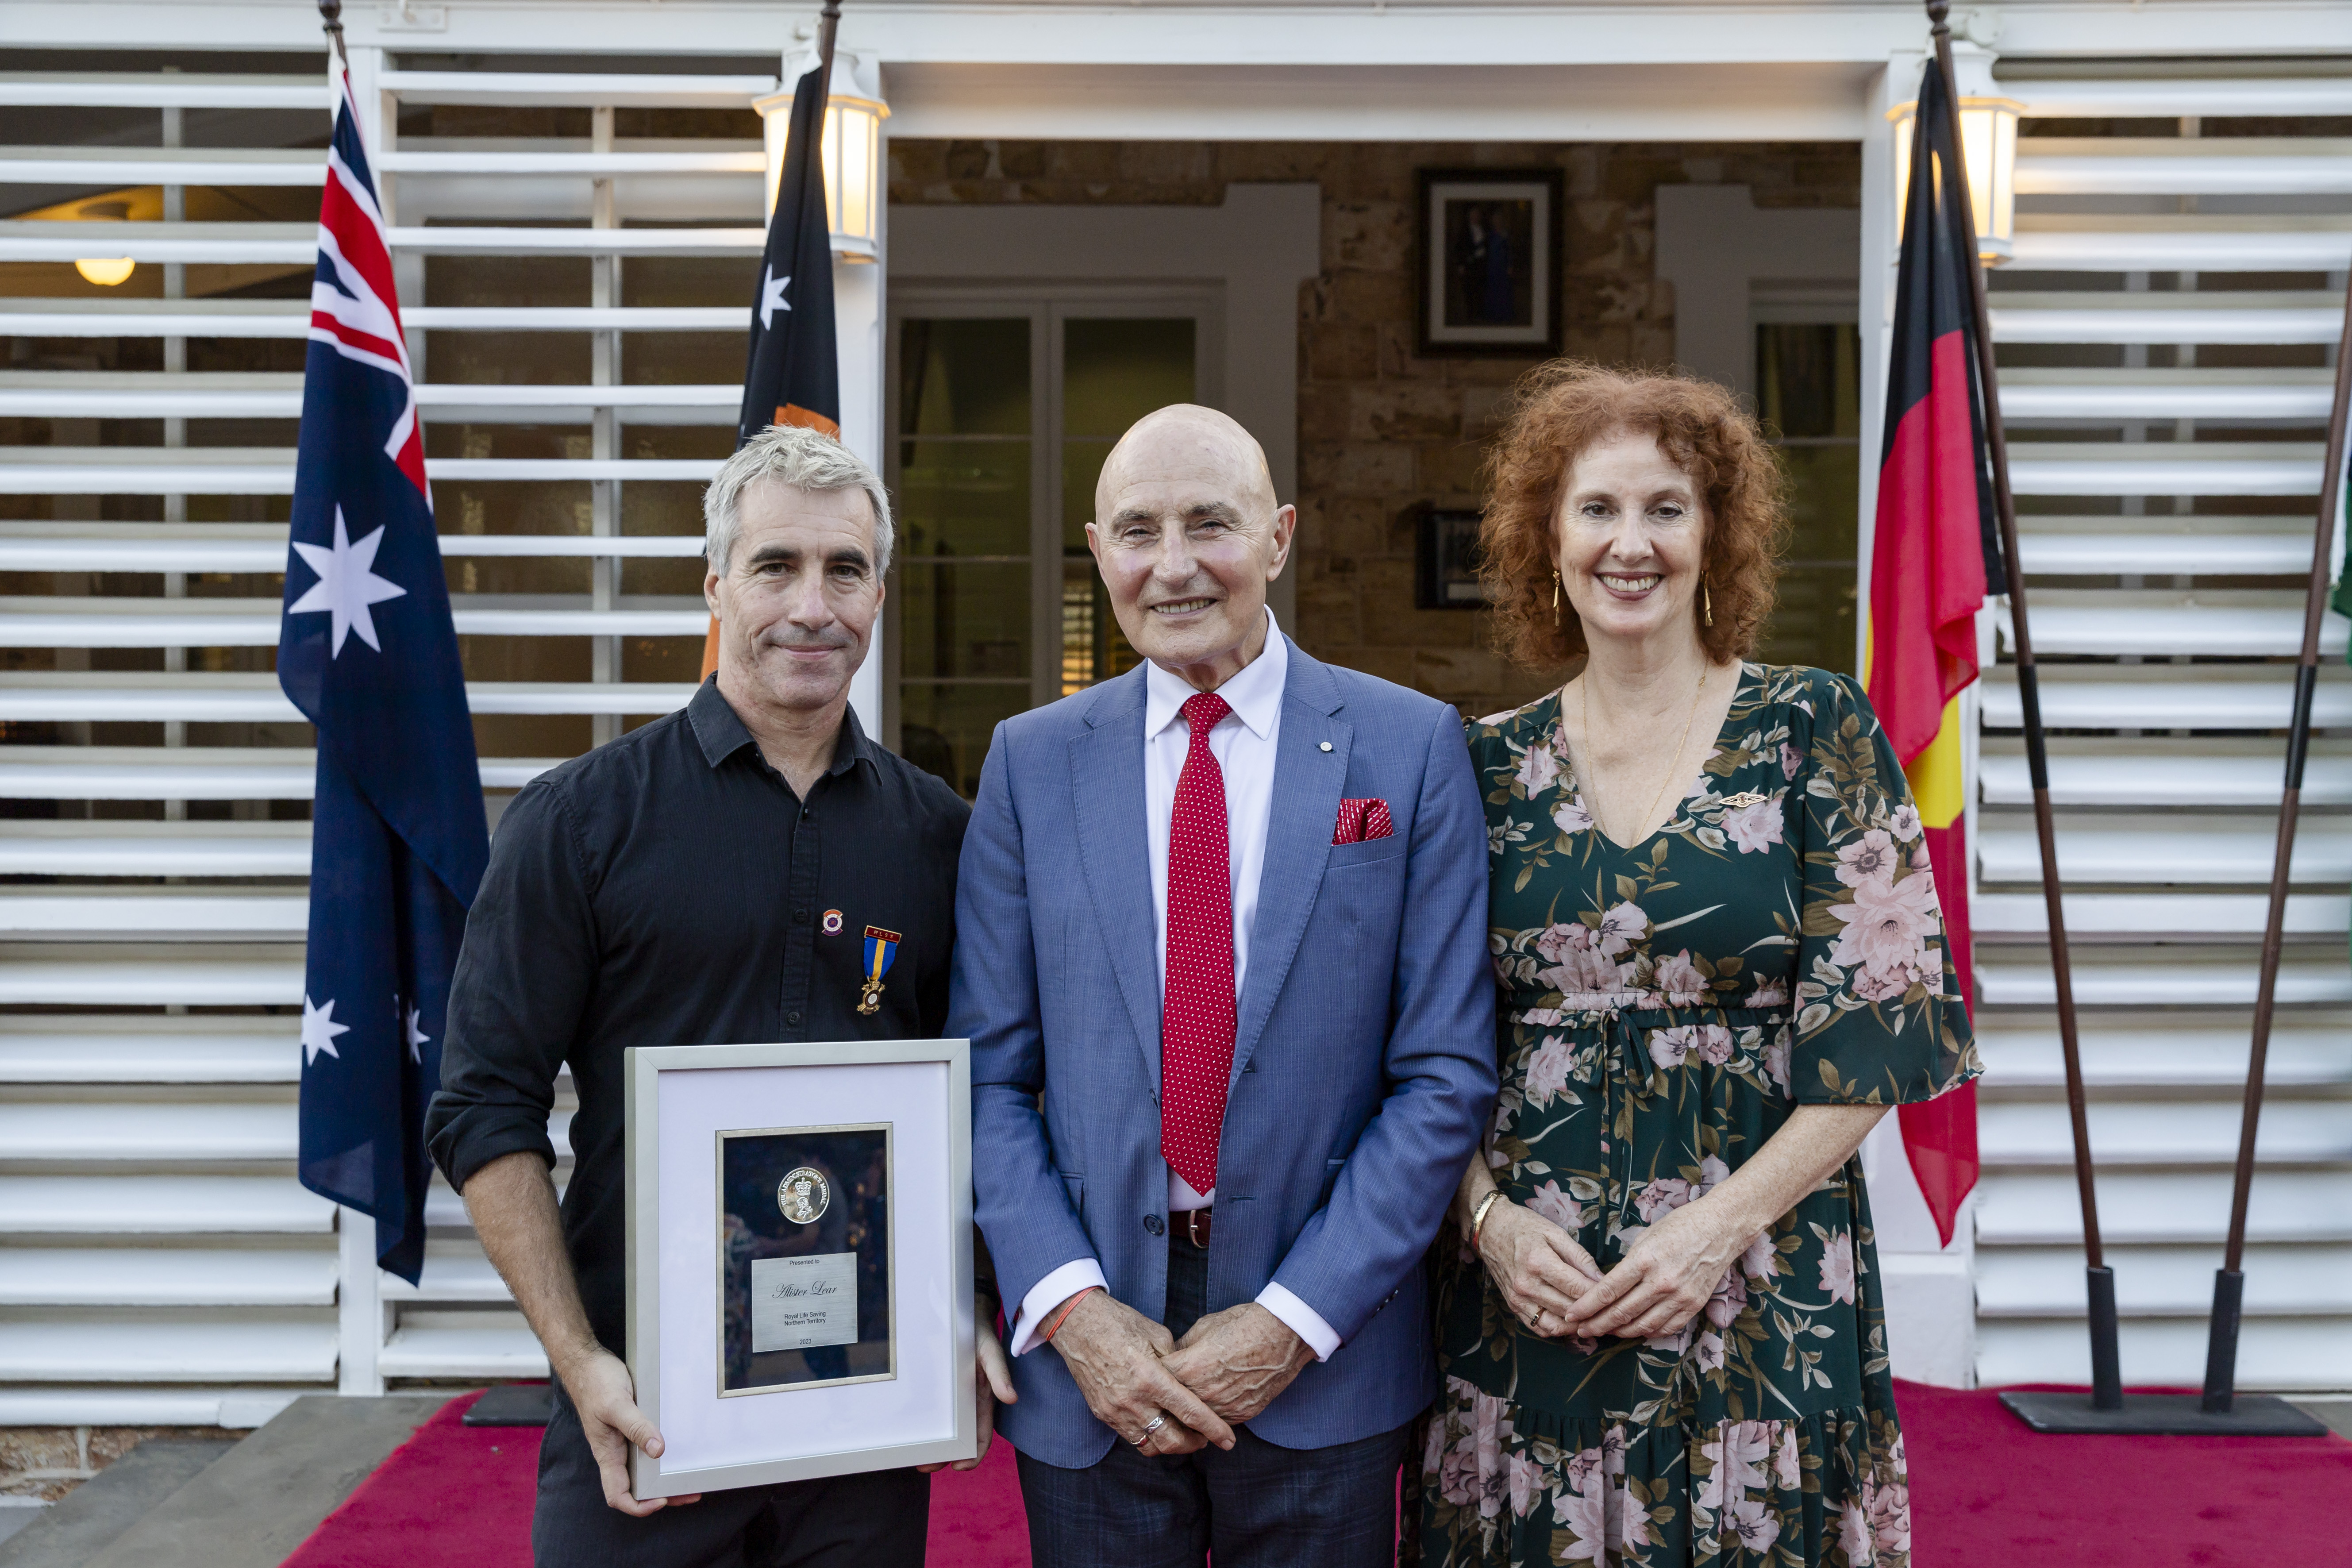 Image of previous recipient, Alistair Lear receiving the Northern Territory Administrator's Award